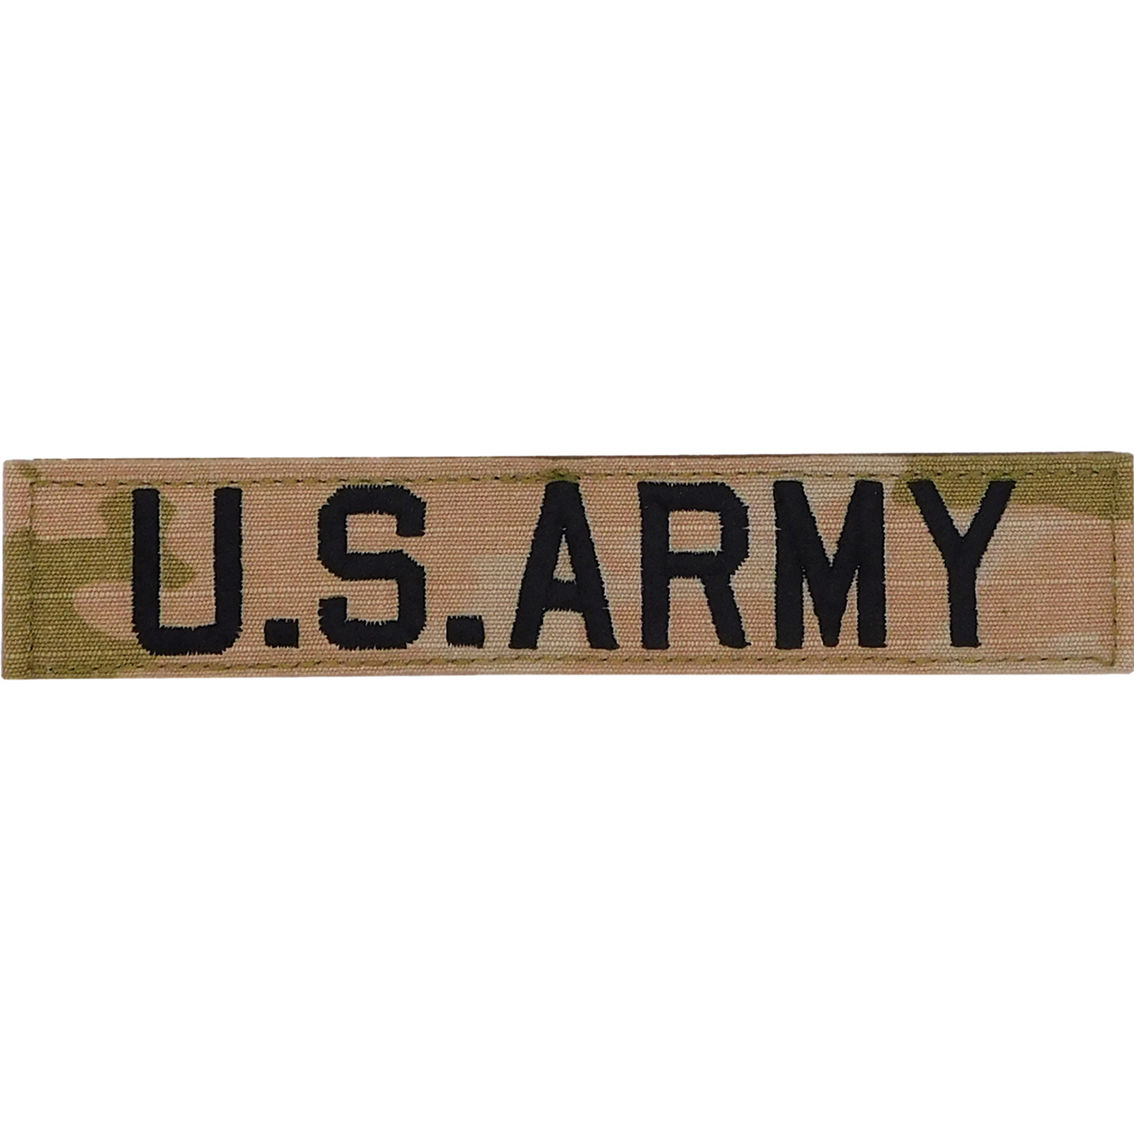 Army Embroidered Branch of Service Tape with Hook & Loop (OCP)